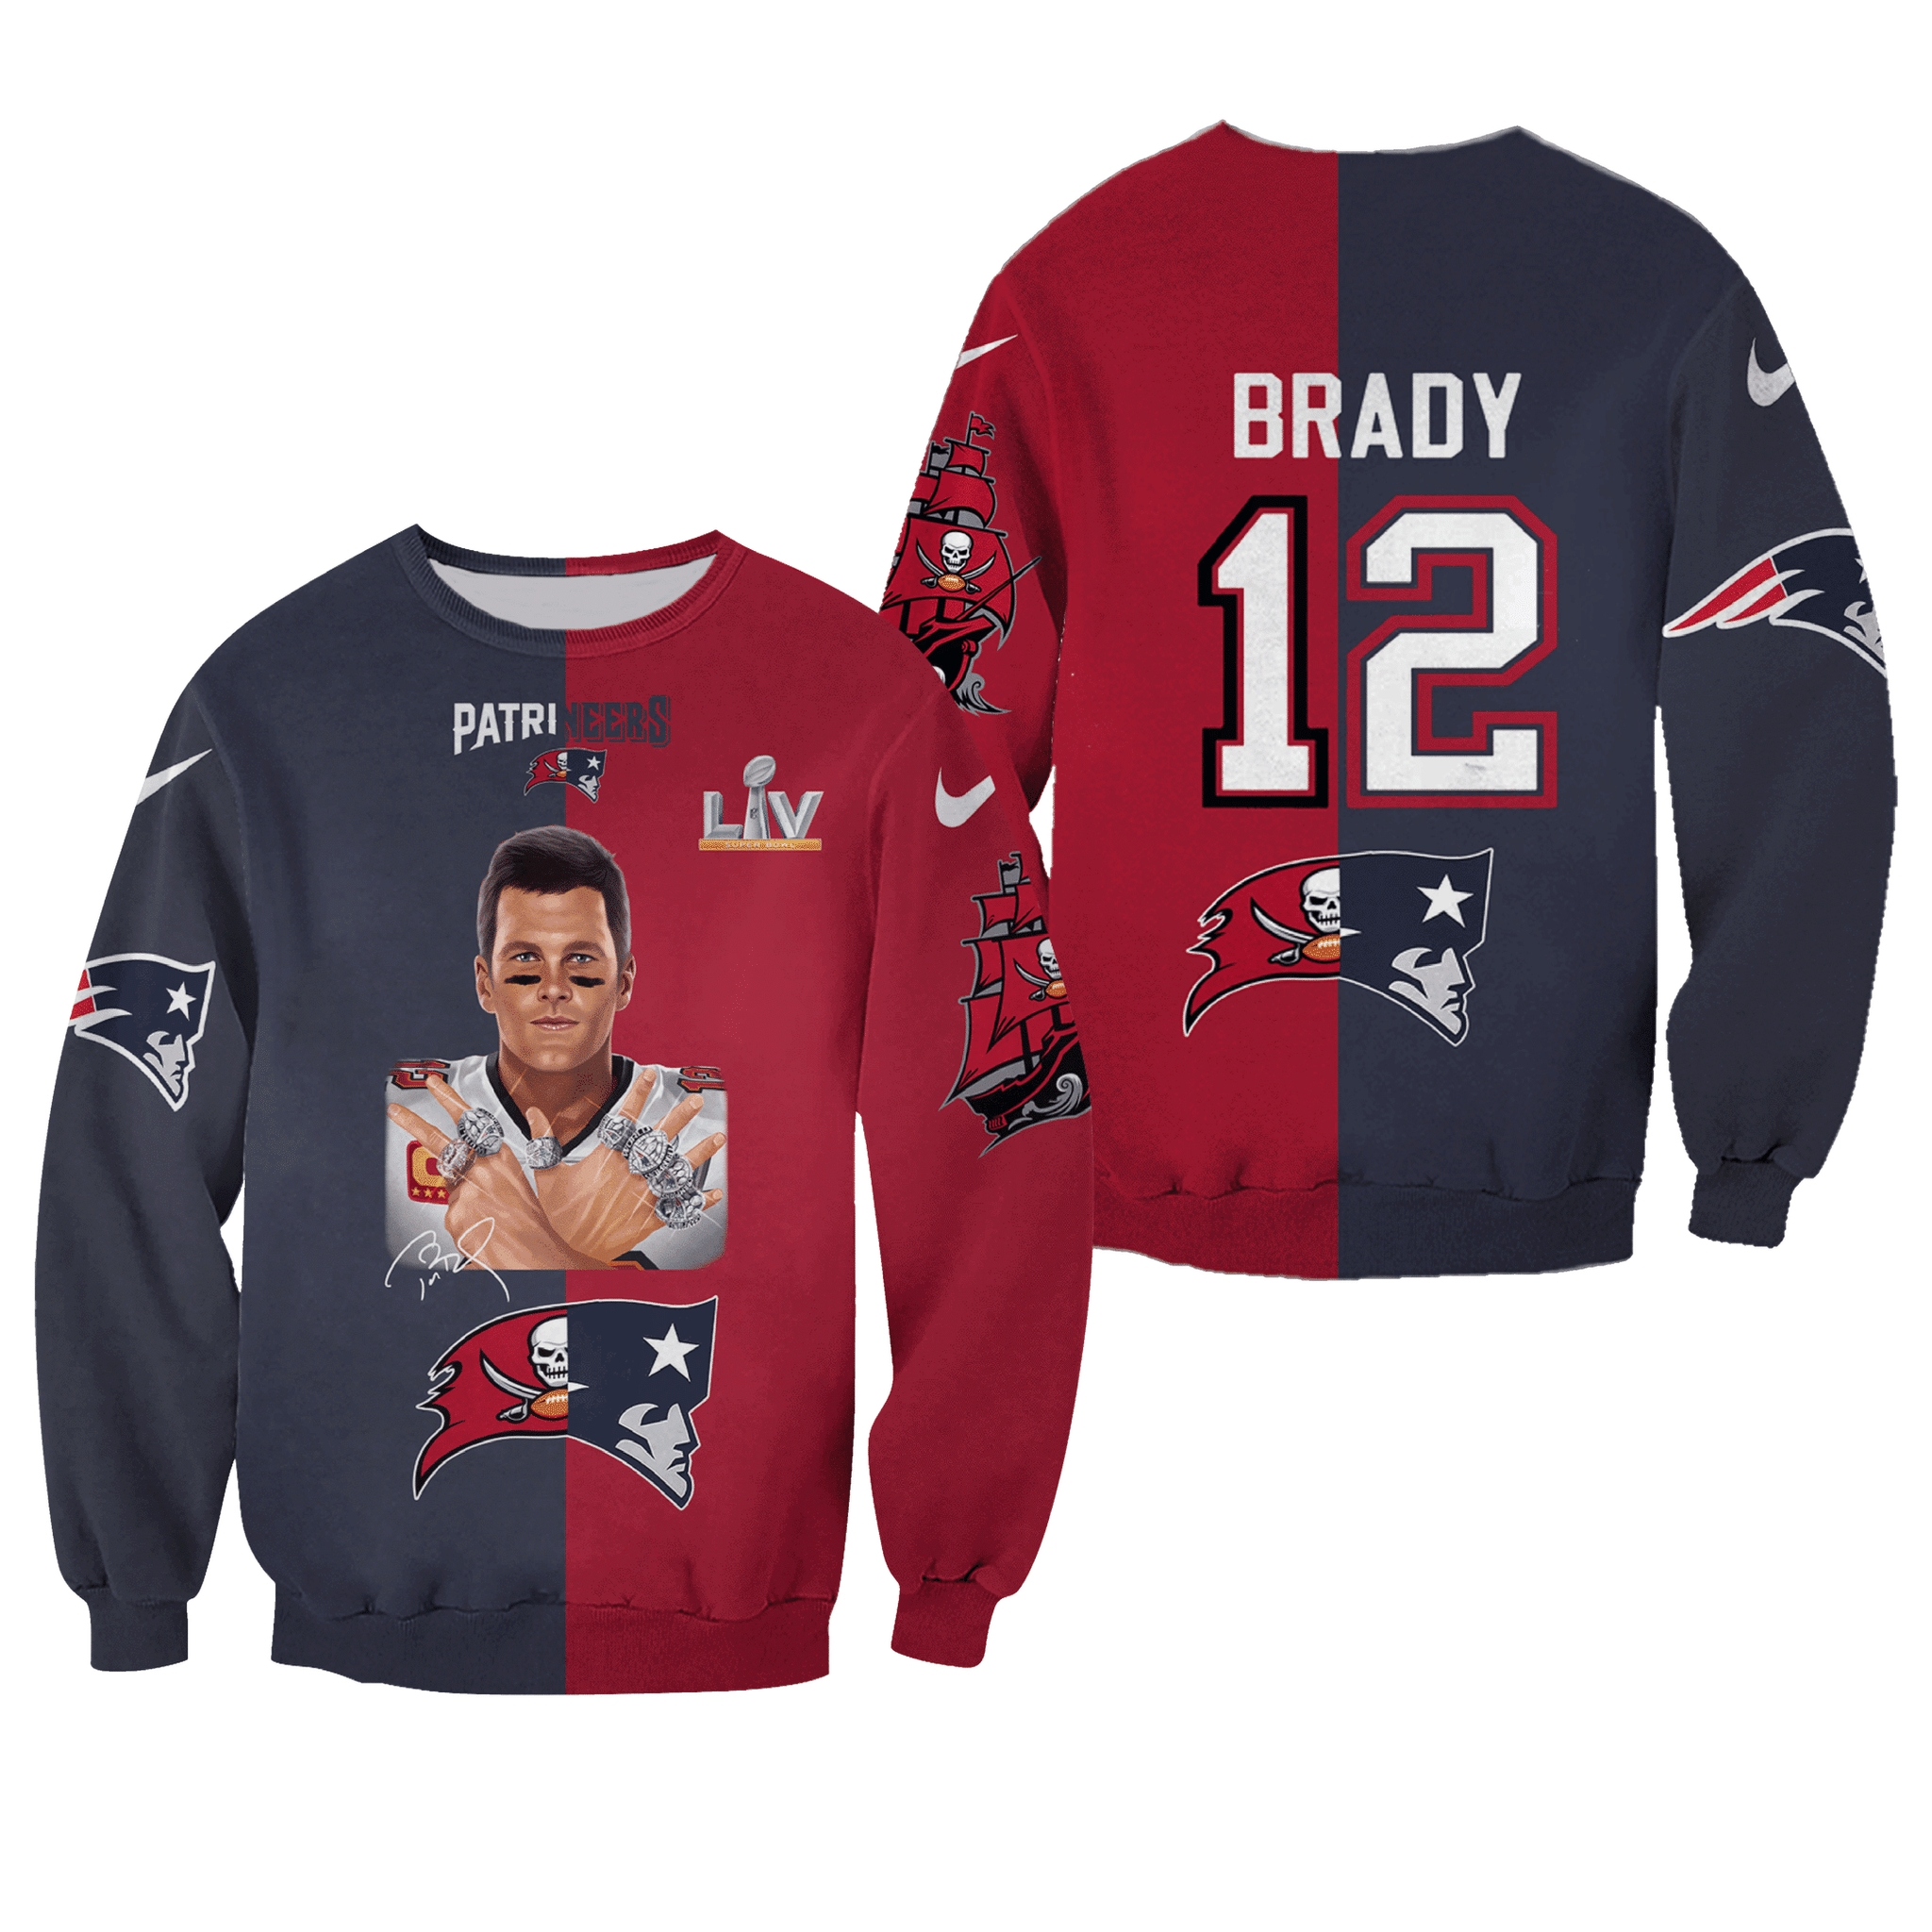 TOP Tom Brady Tampa Bay Buccaneers and New England Patriots All Over Print Sweatshirt 11